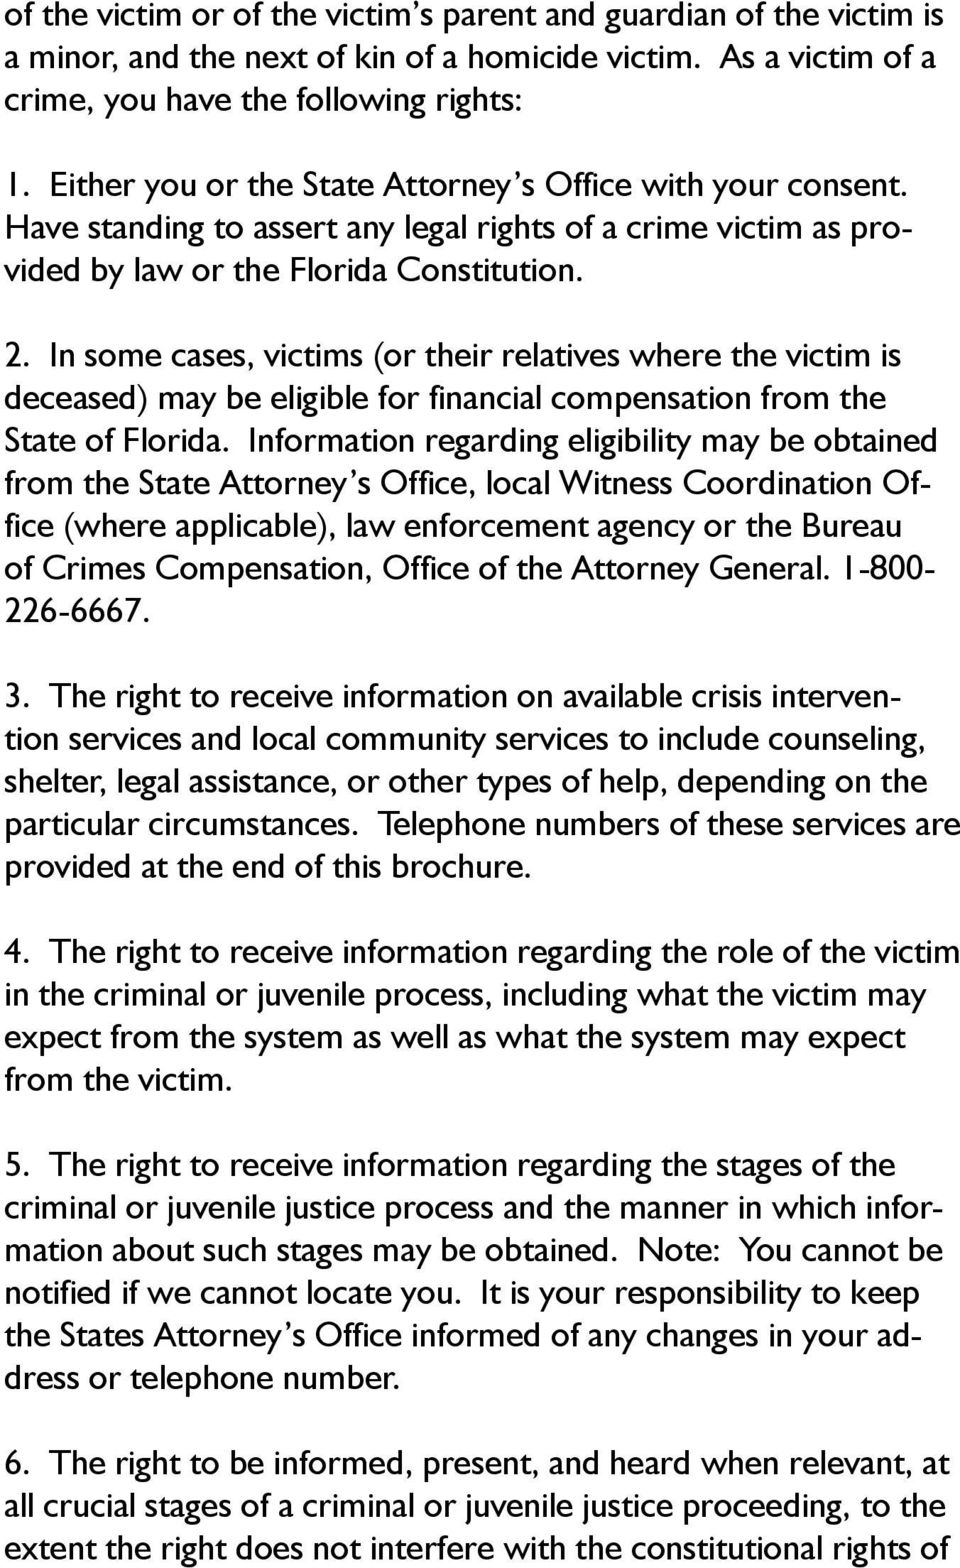 In some cases, victims (or their relatives where the victim is deceased) may be eligible for financial compensation from the State of Florida.